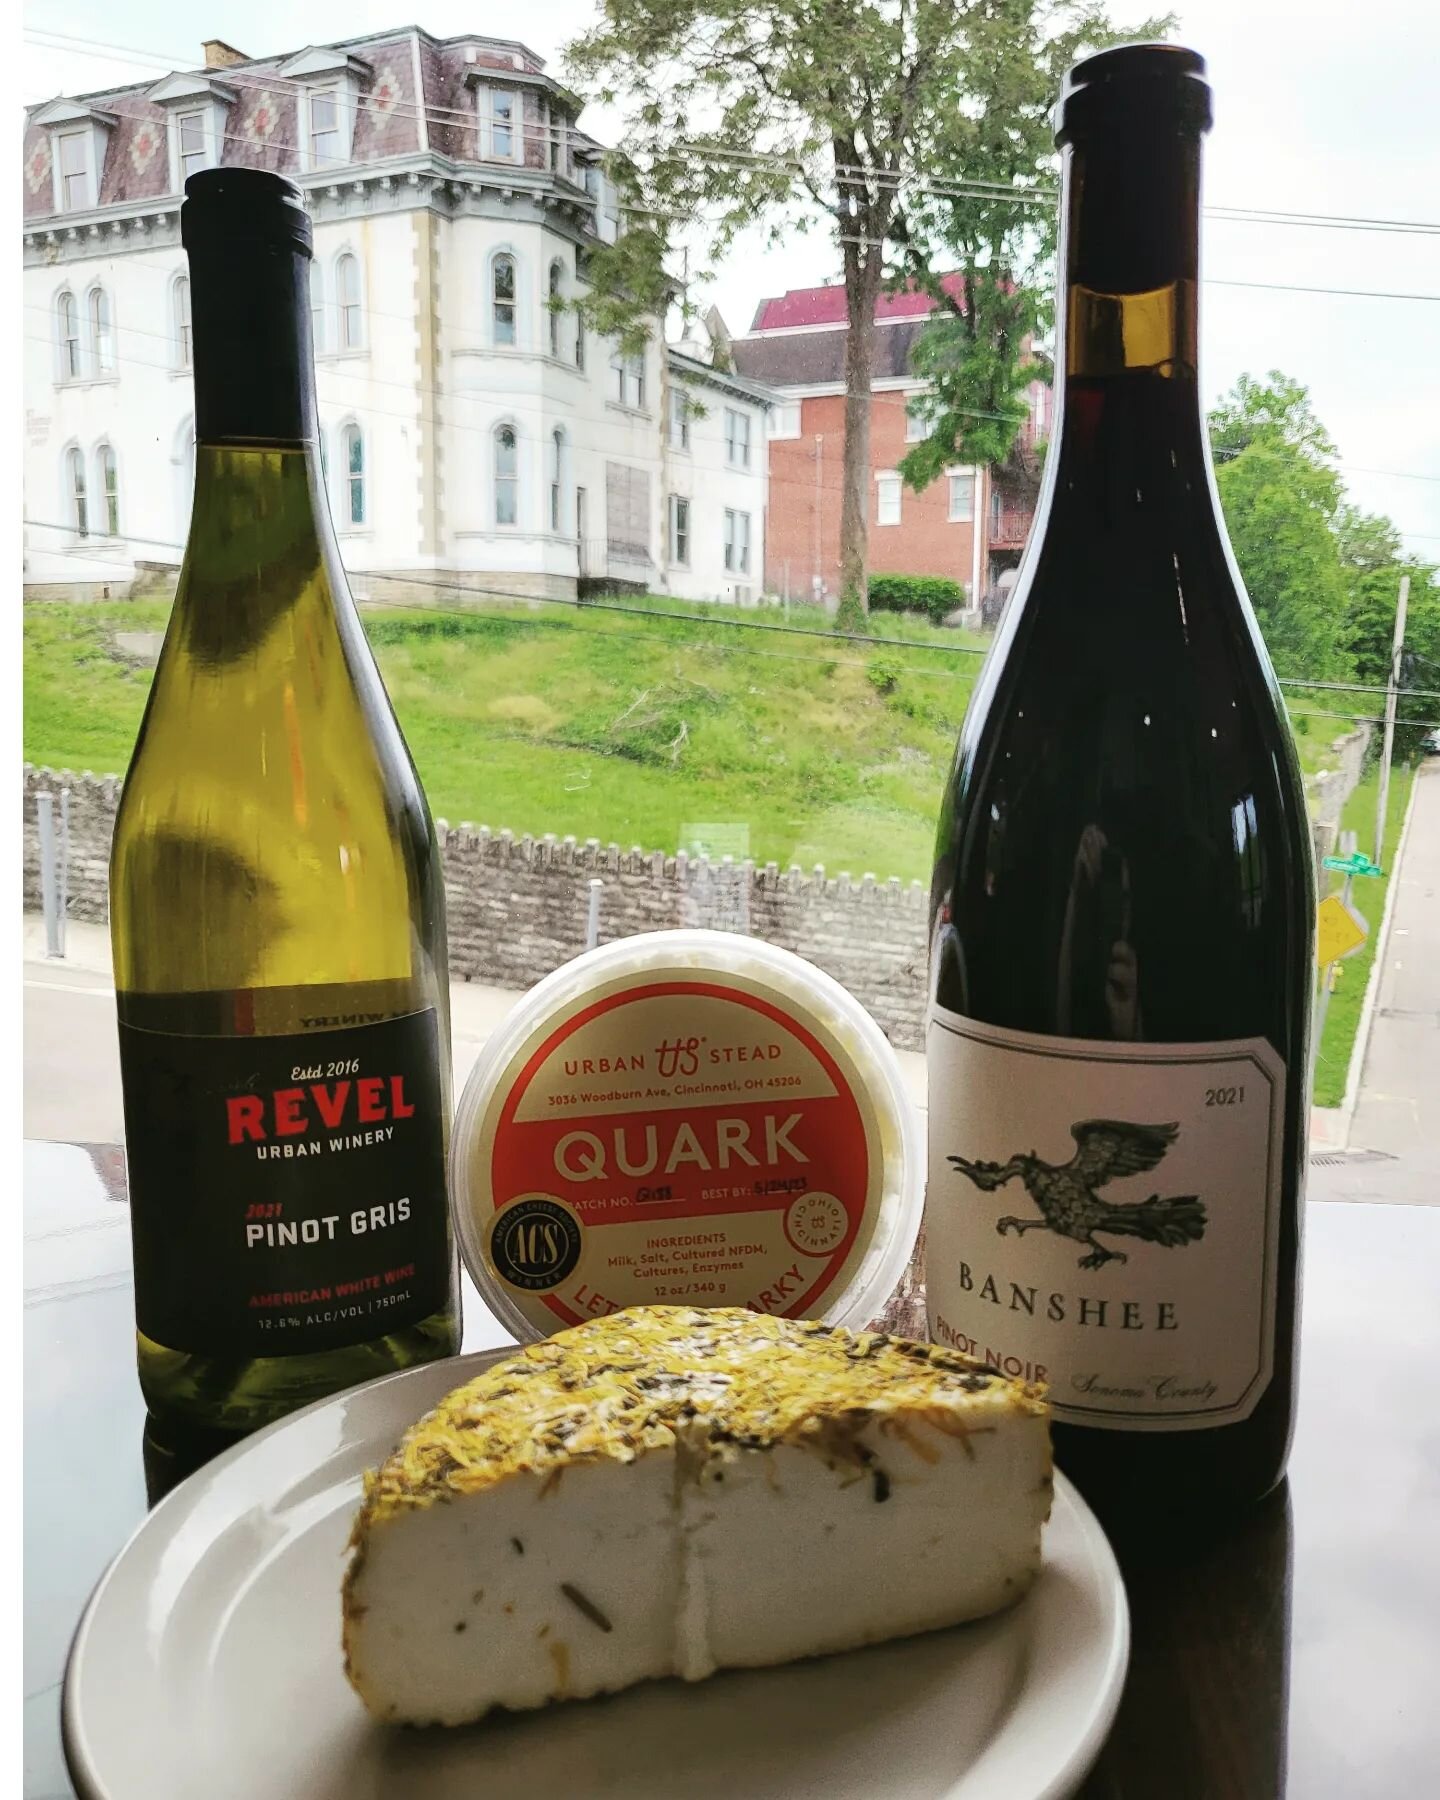 Wine &amp; Cheese Flight is back!
Grab it today and tomorrow, a scrumptious  Juilanna Capriole and Urban Stead Quark. 
We have partnered up with Revel Wines and Banshee Winery to compliment  the flavors!

#winepairings #wineandcheese #pairings 
@urba